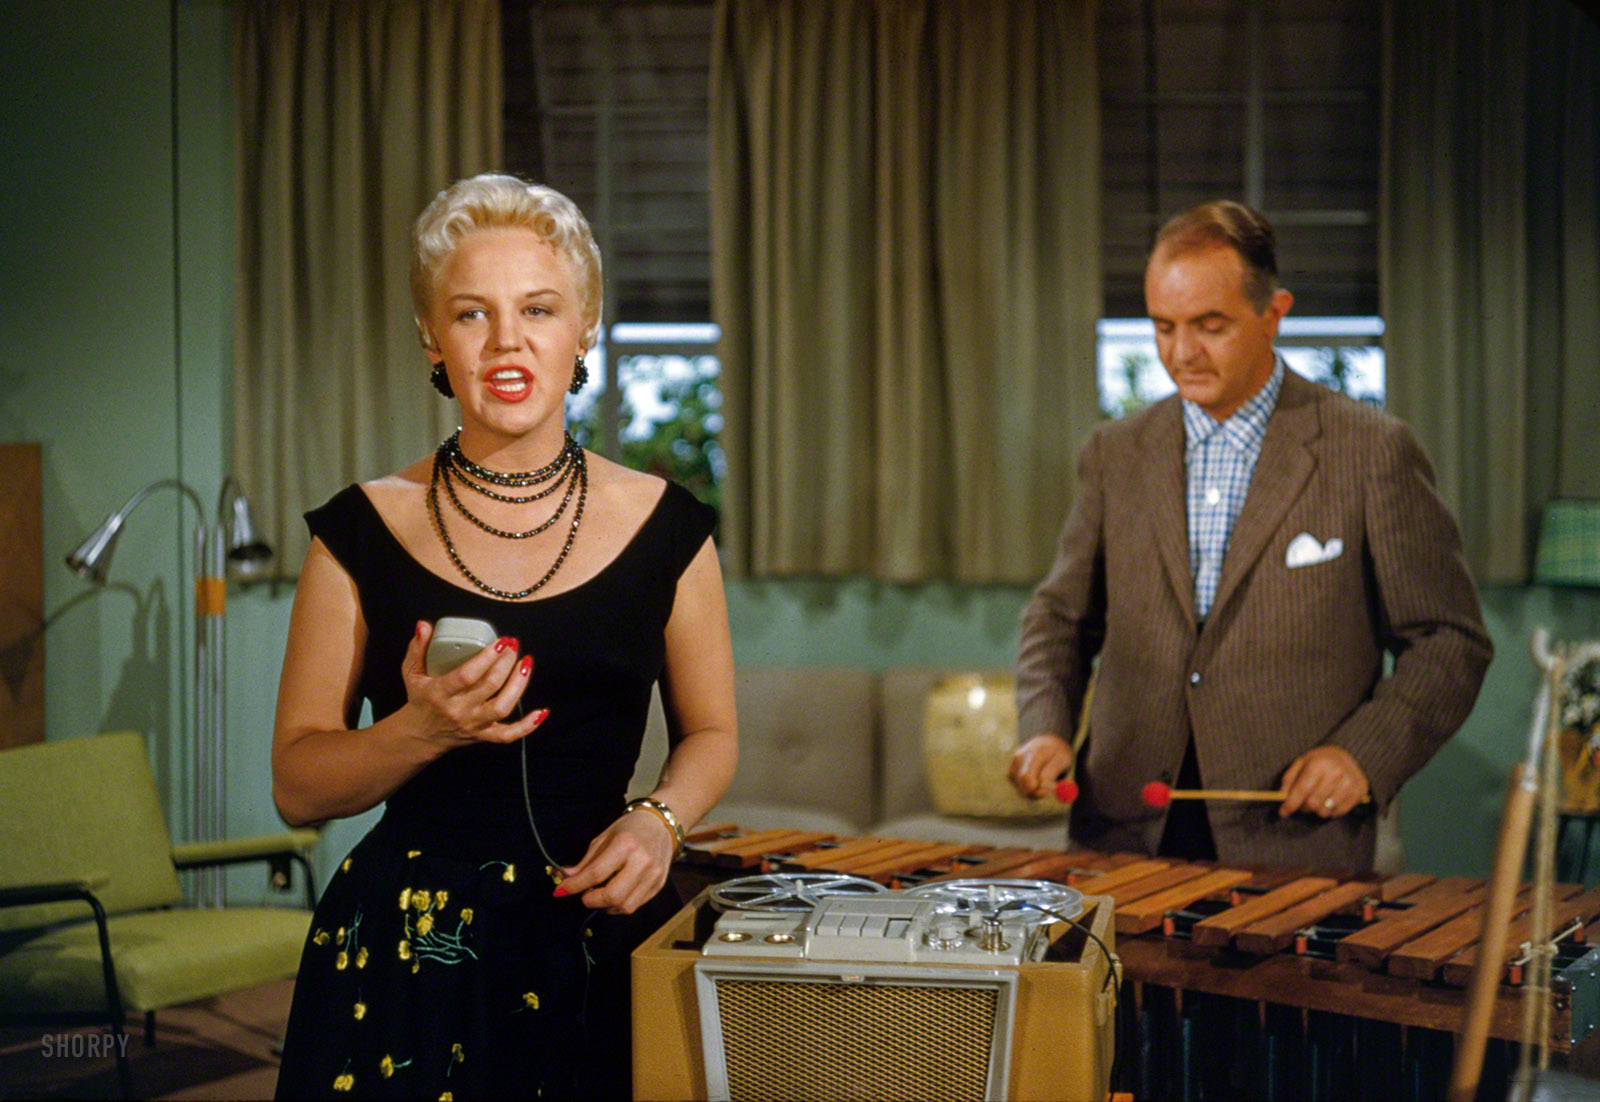 &nbsp; &nbsp; &nbsp; &nbsp; tterrace informs us: Filmed specifically for the Disneyland TV show episode "Cavalcade of Song," Feb. 16, 1955.
1955. "Peggy Lee singing into tape recorder accompanied by Sonny Burke. Soundtrack for Walt Disney CinemaScope cartoon feature Lady and the Tramp." 35mm Kodachrome by Robert Vose for Look magazine. View full size.